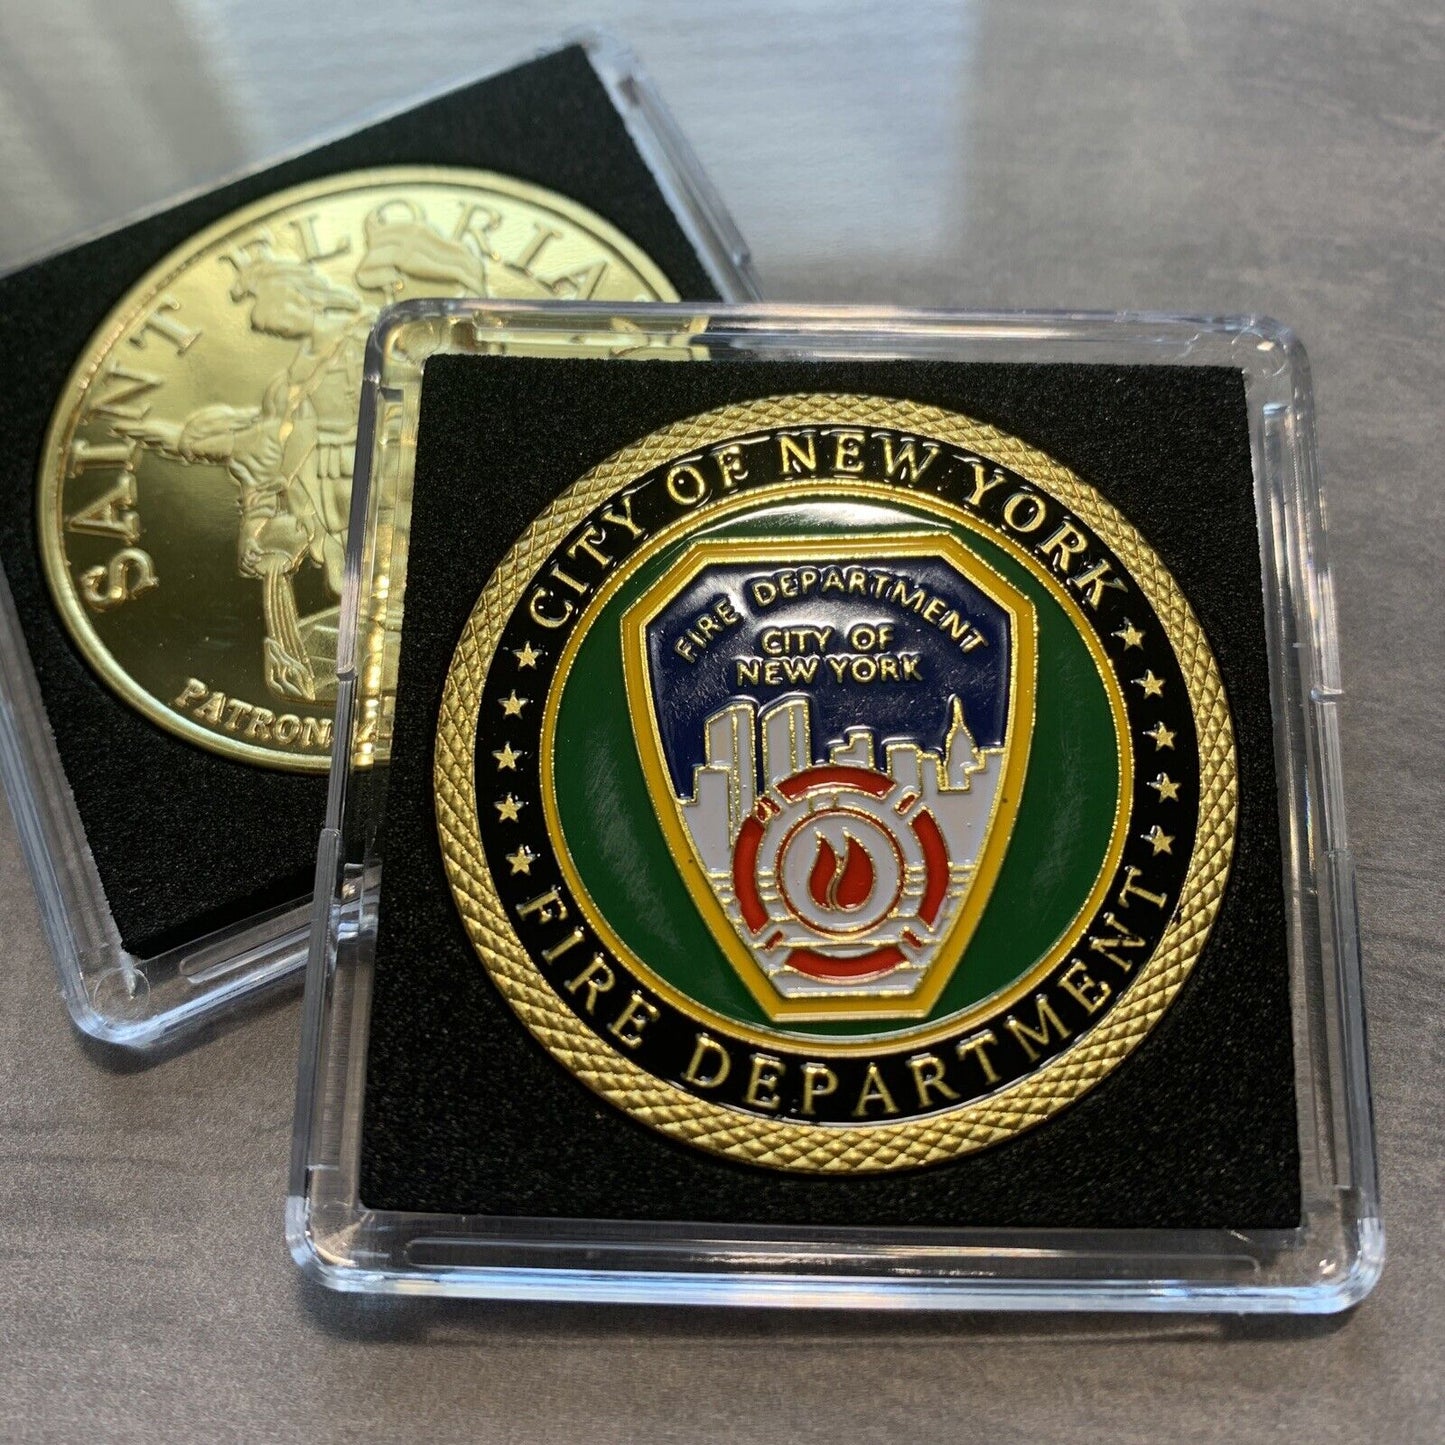 FDNY NEW YORK FIRE DEPARTMENT Commemorative Gift Challenge Coin Lot 5/10 Pcs.